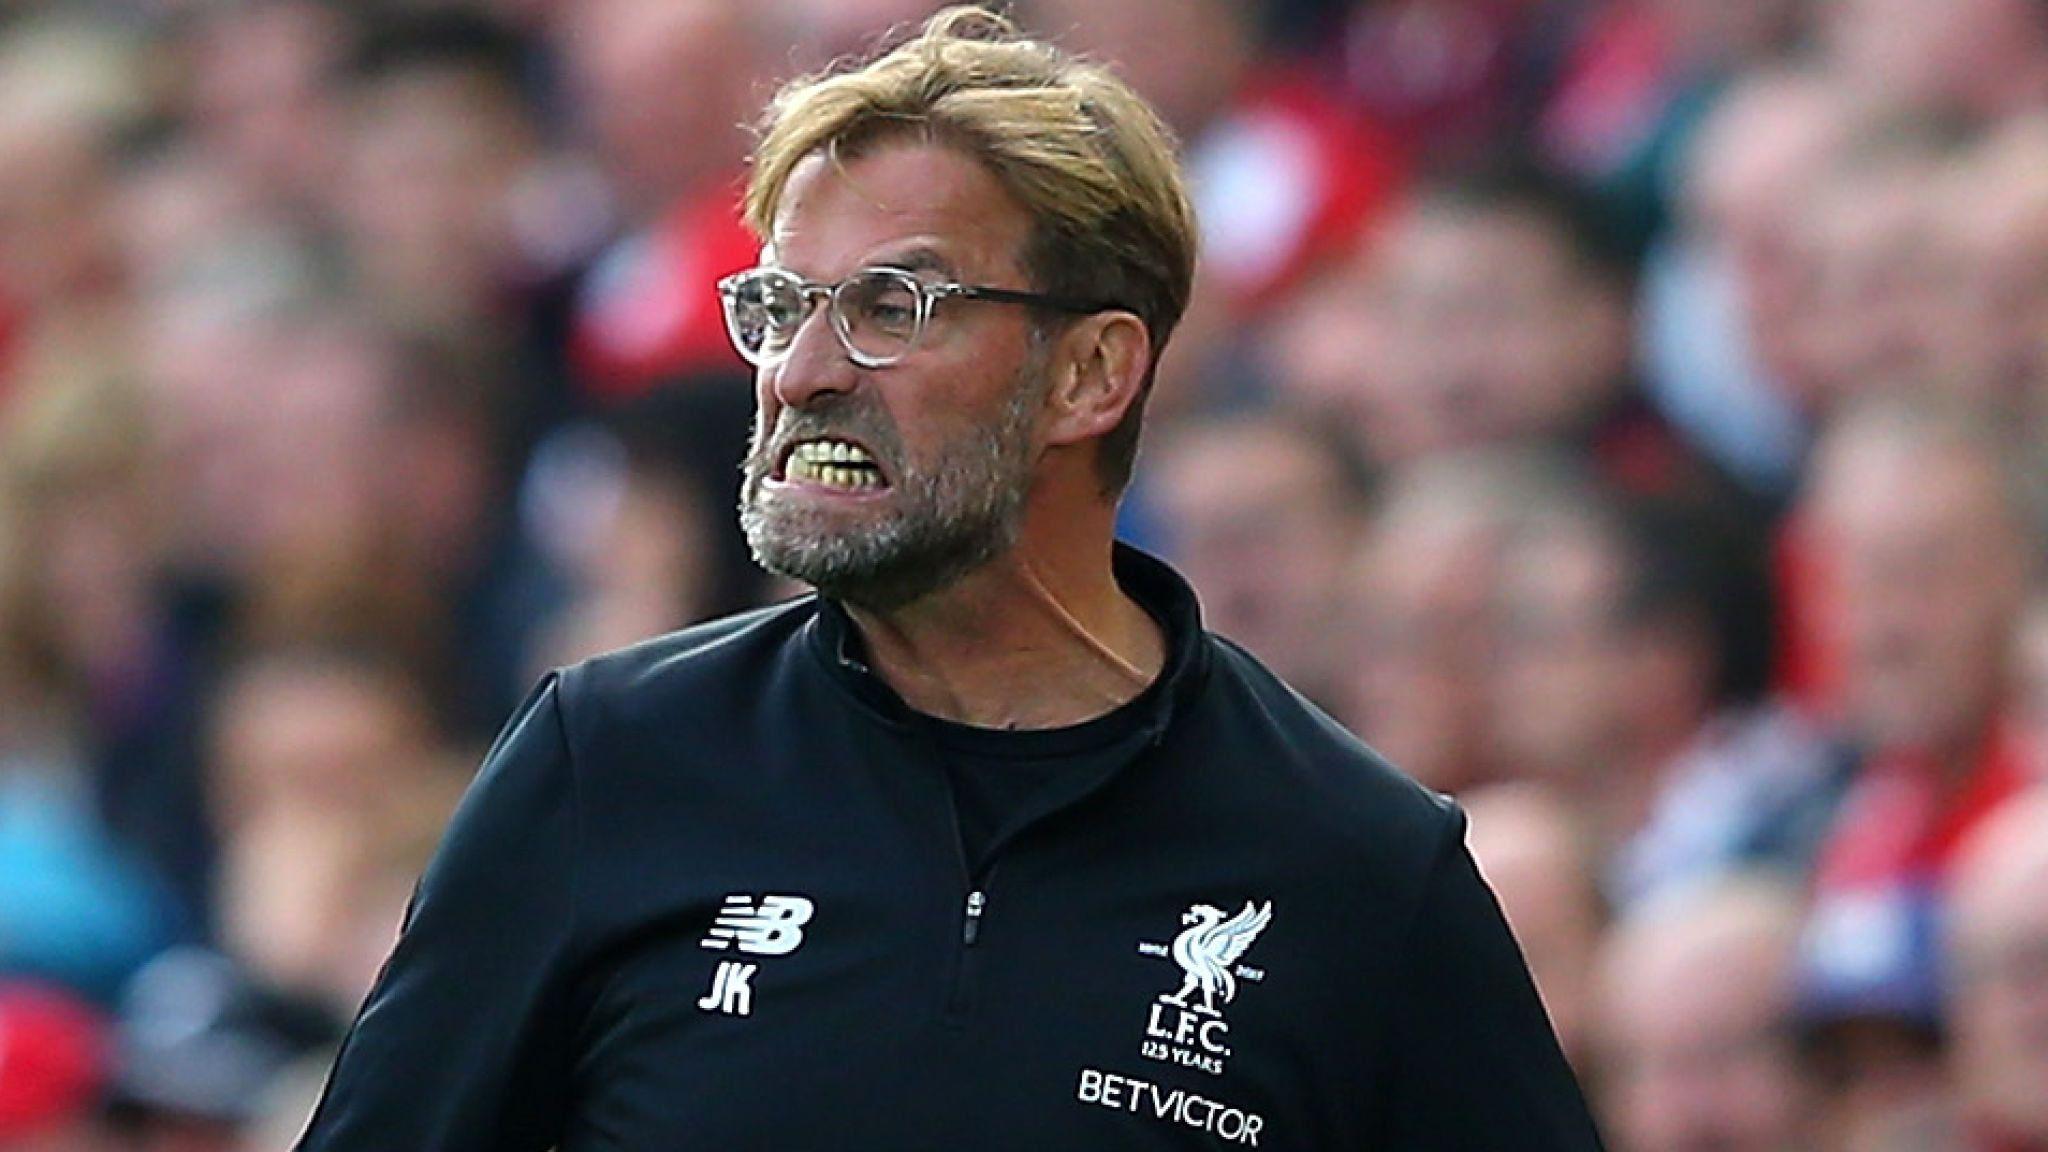 Liverpool have to demand more from Klopp and his team. Face of Football